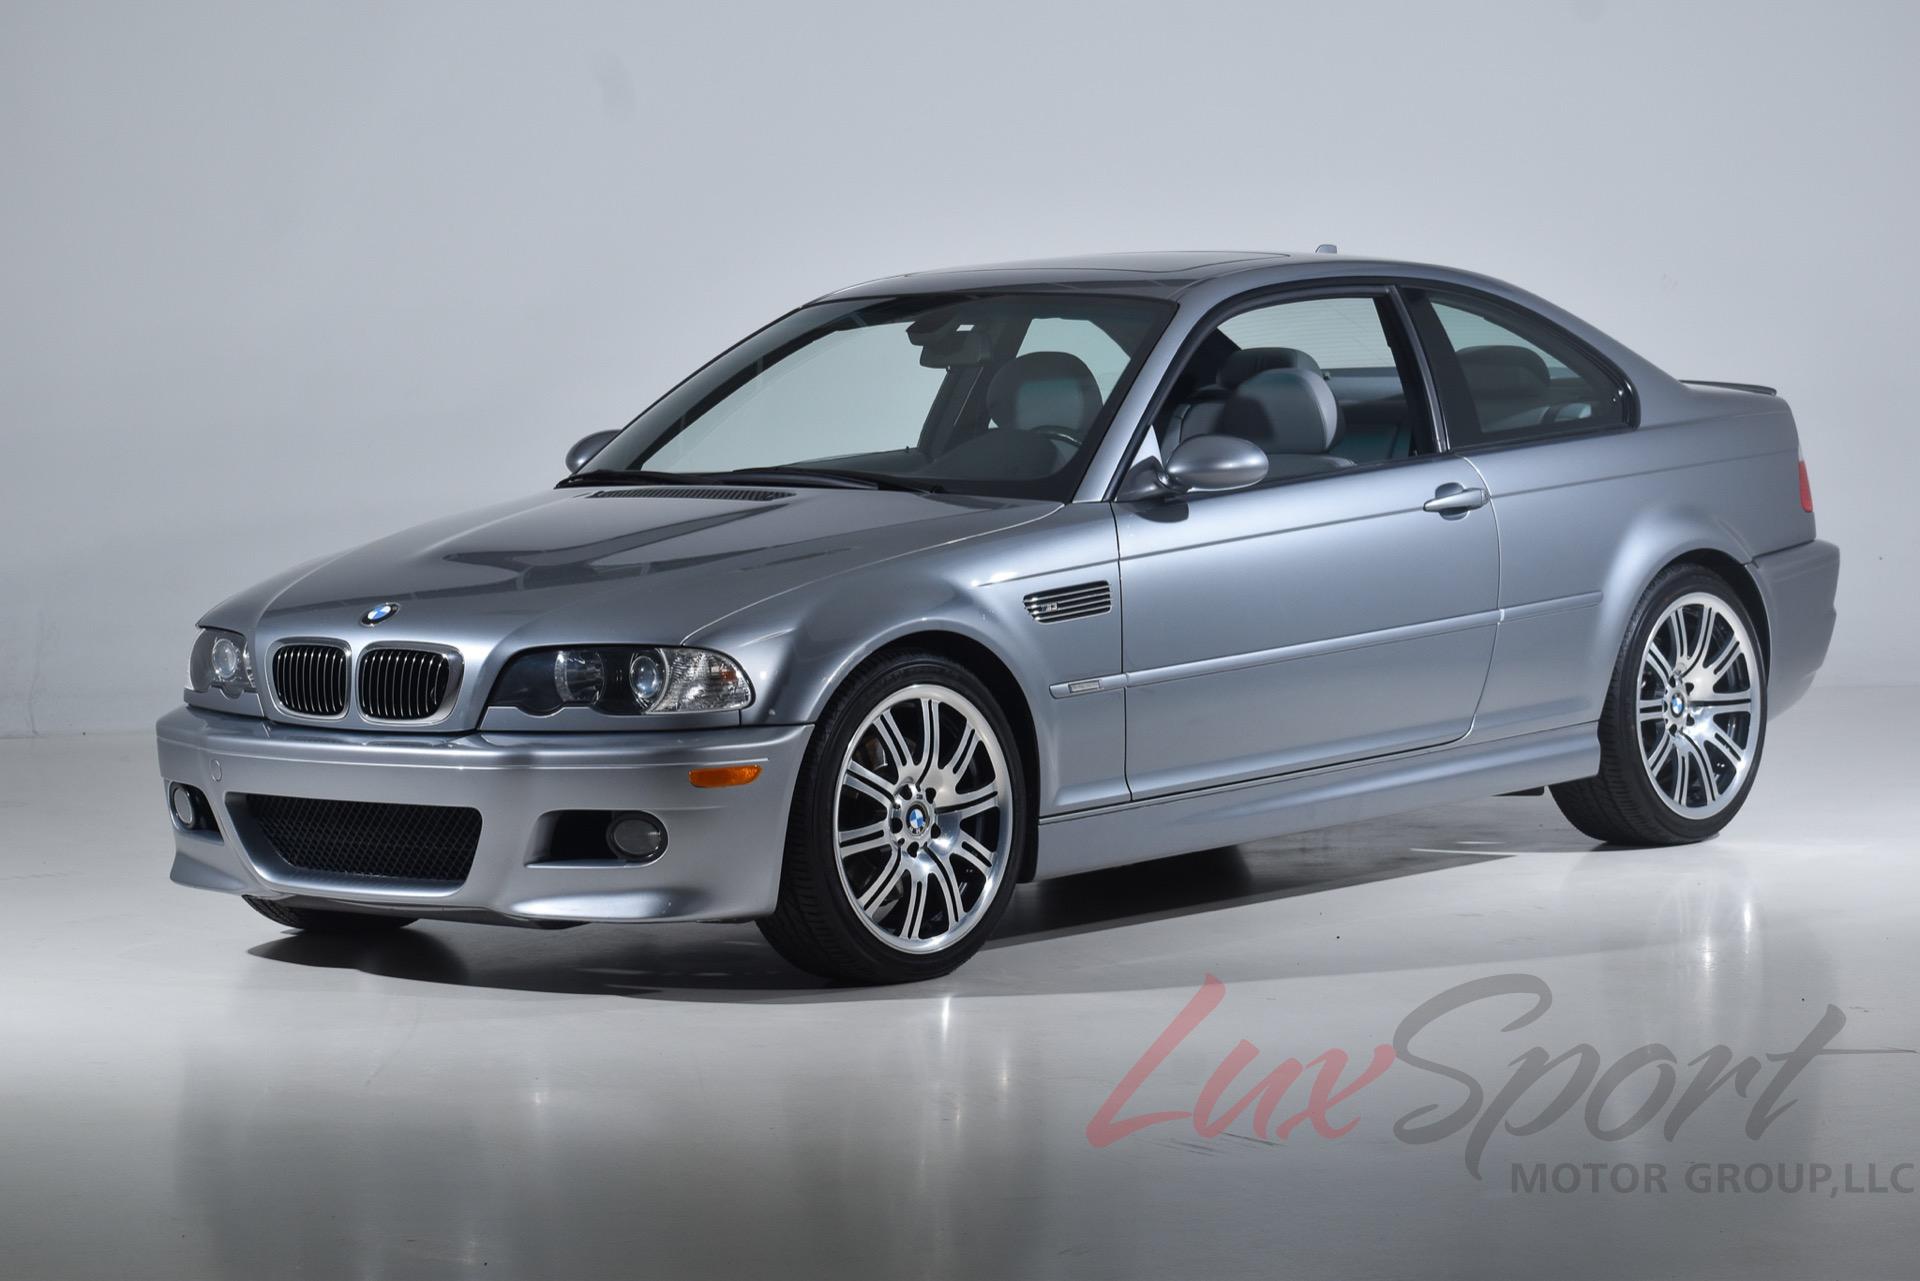 2006 BMW E46 M3 Coupe Stock # 2006128 for sale near Plainview, NY | NY BMW  Dealer